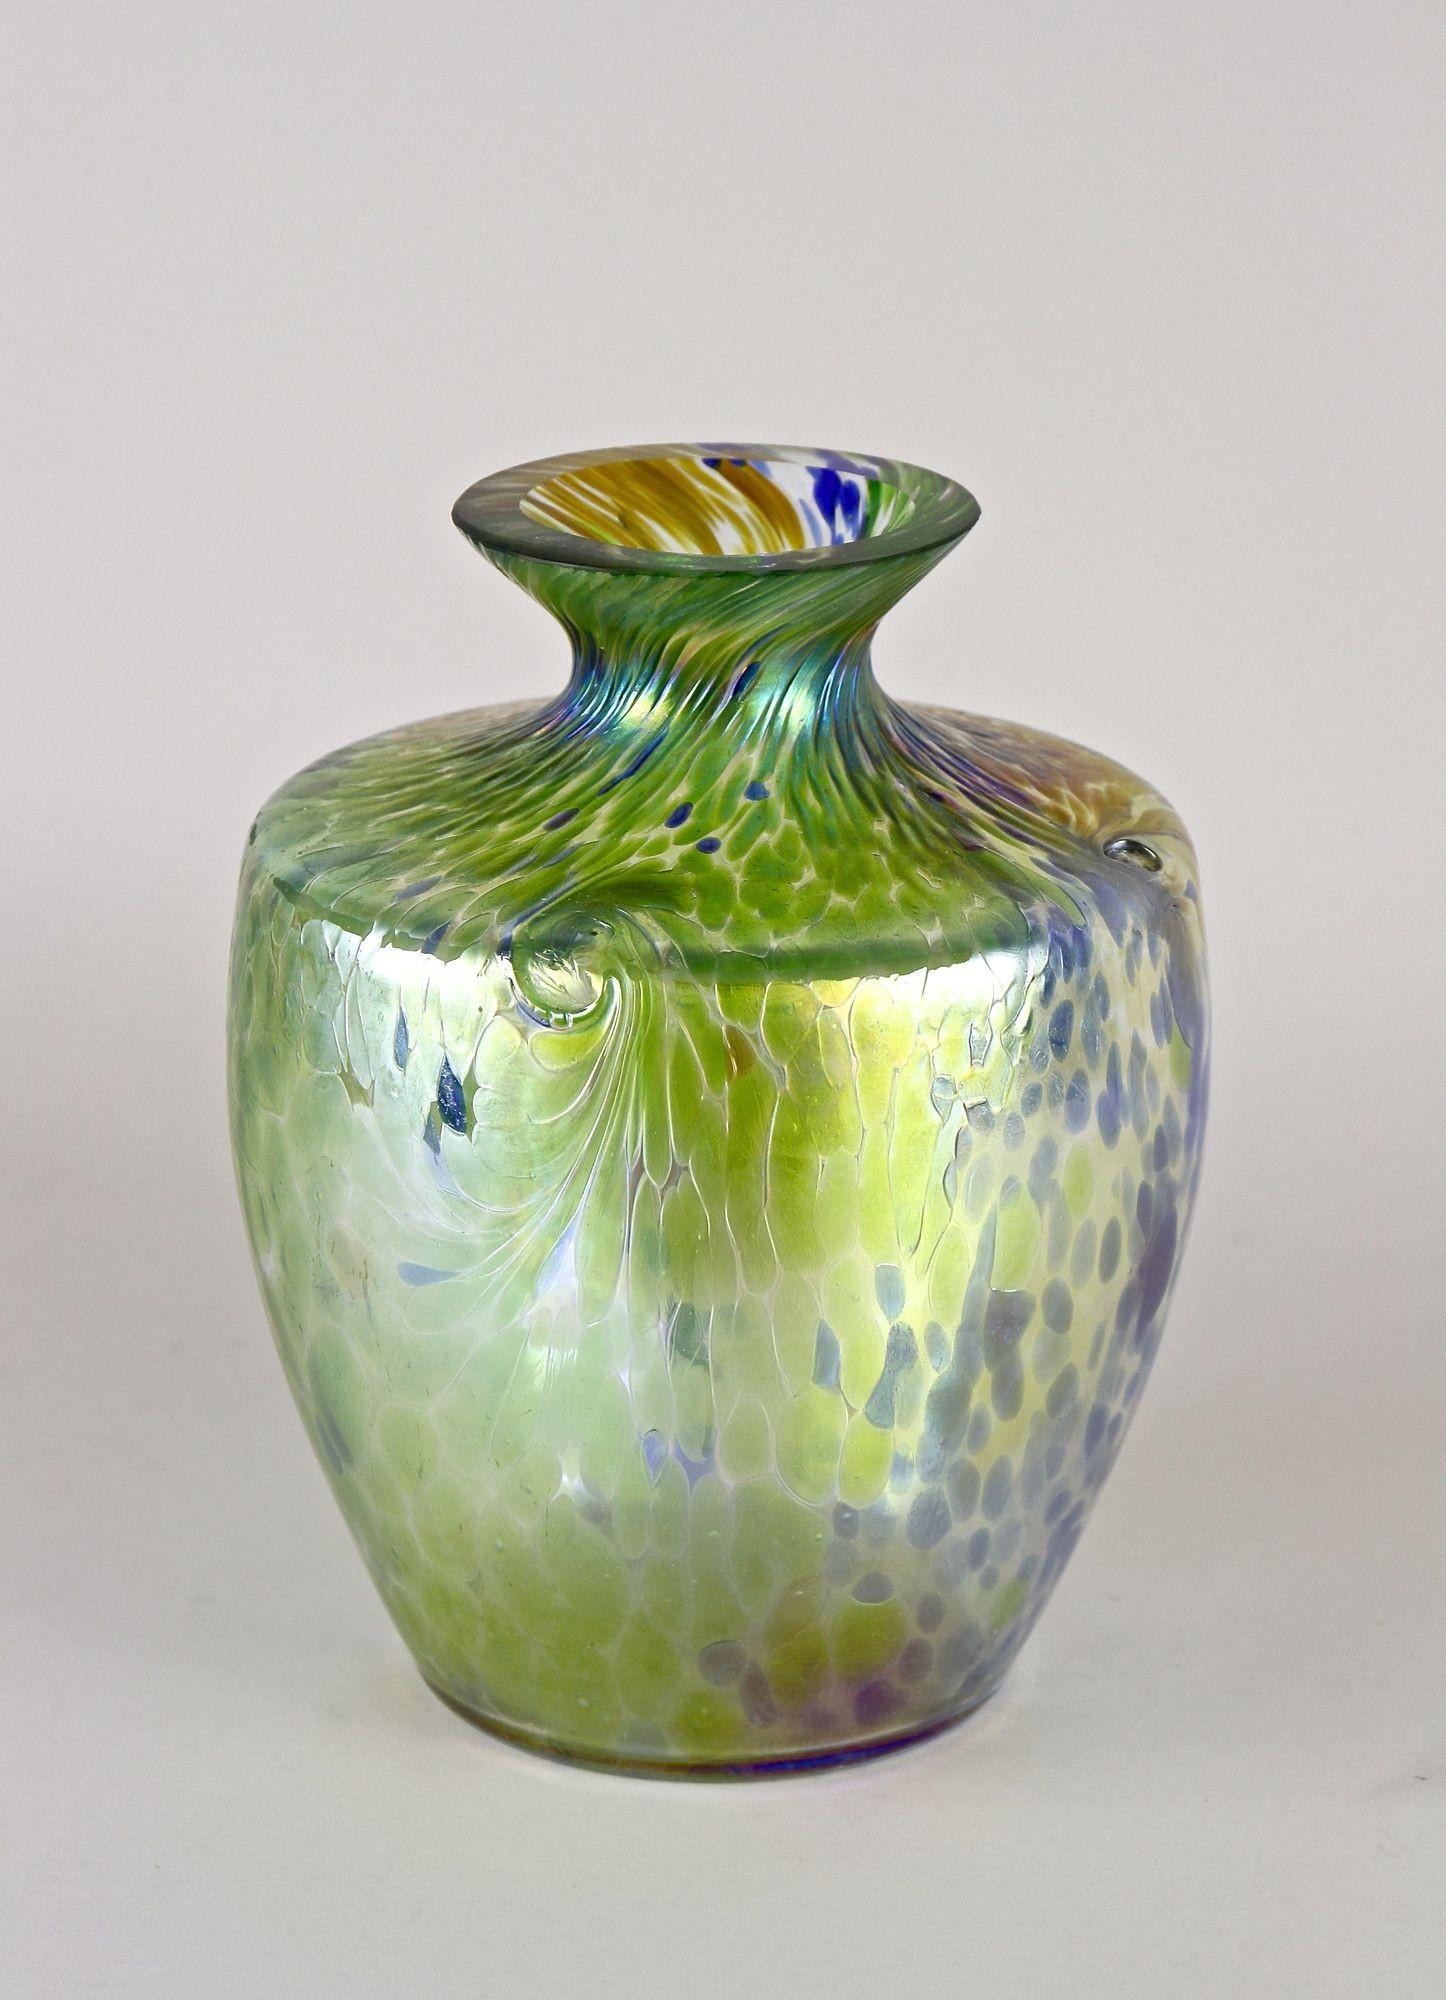 20th Century Iridescent Art Nouveau Glass Vase Attributed To Fritz Heckert, Bohemia ca. 1905 For Sale